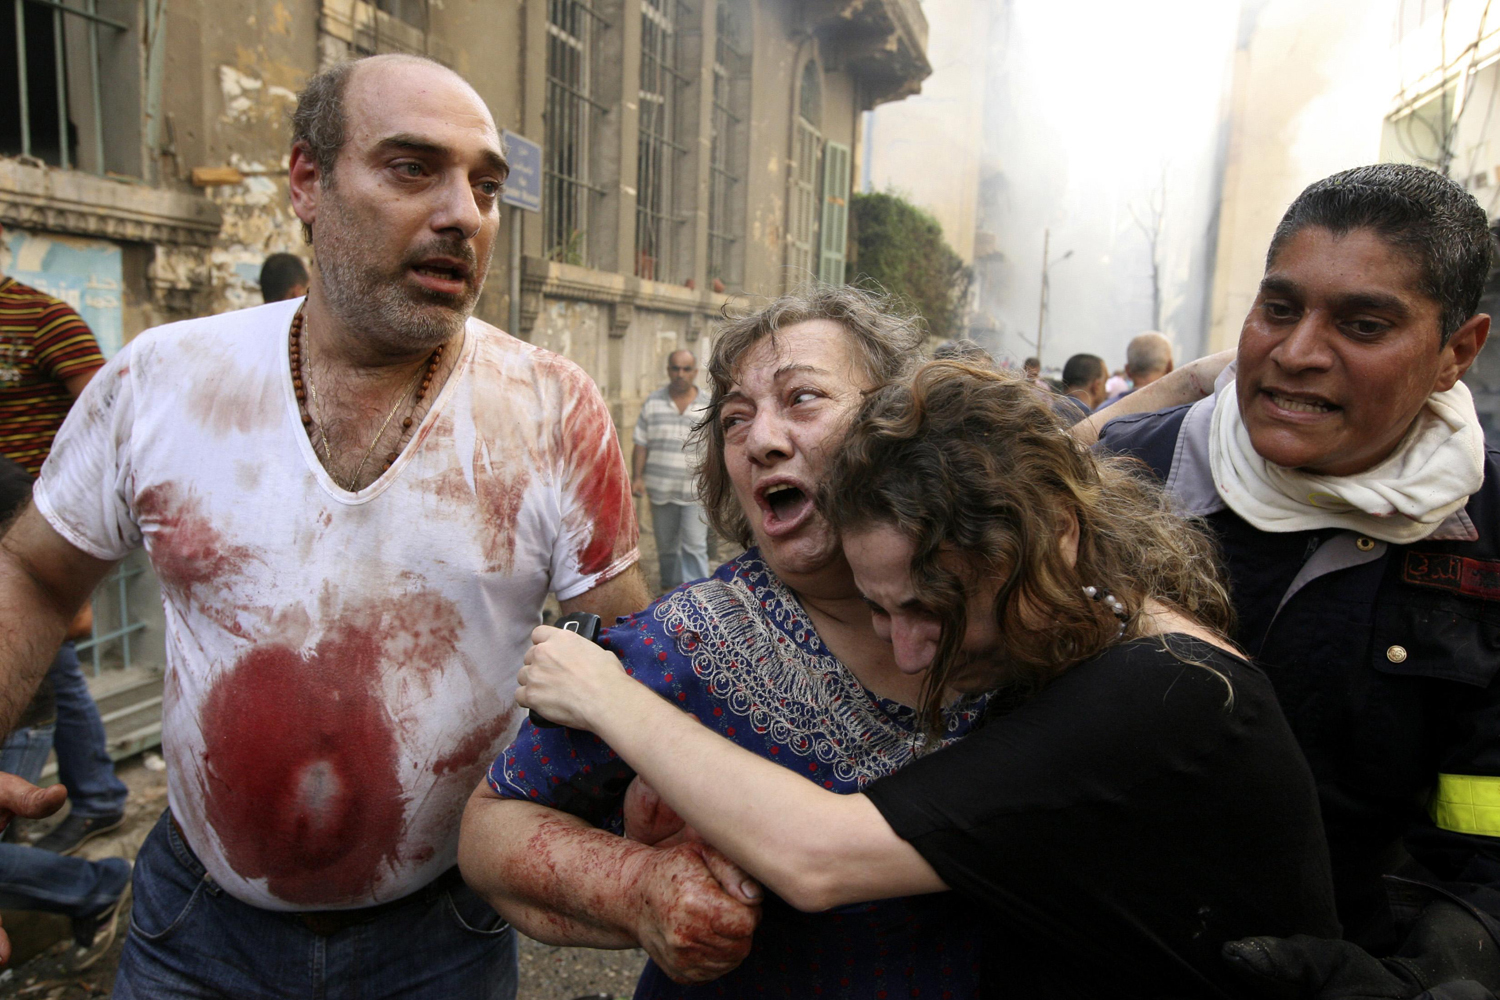 Image: Oct. 19, 2012. Relatives comfort a wounded woman at the site of an explosion in Beirut. A huge car bomb exploded in central Beirut during rush hour killing at least two people and wounding 46, witnesses and security sources said.